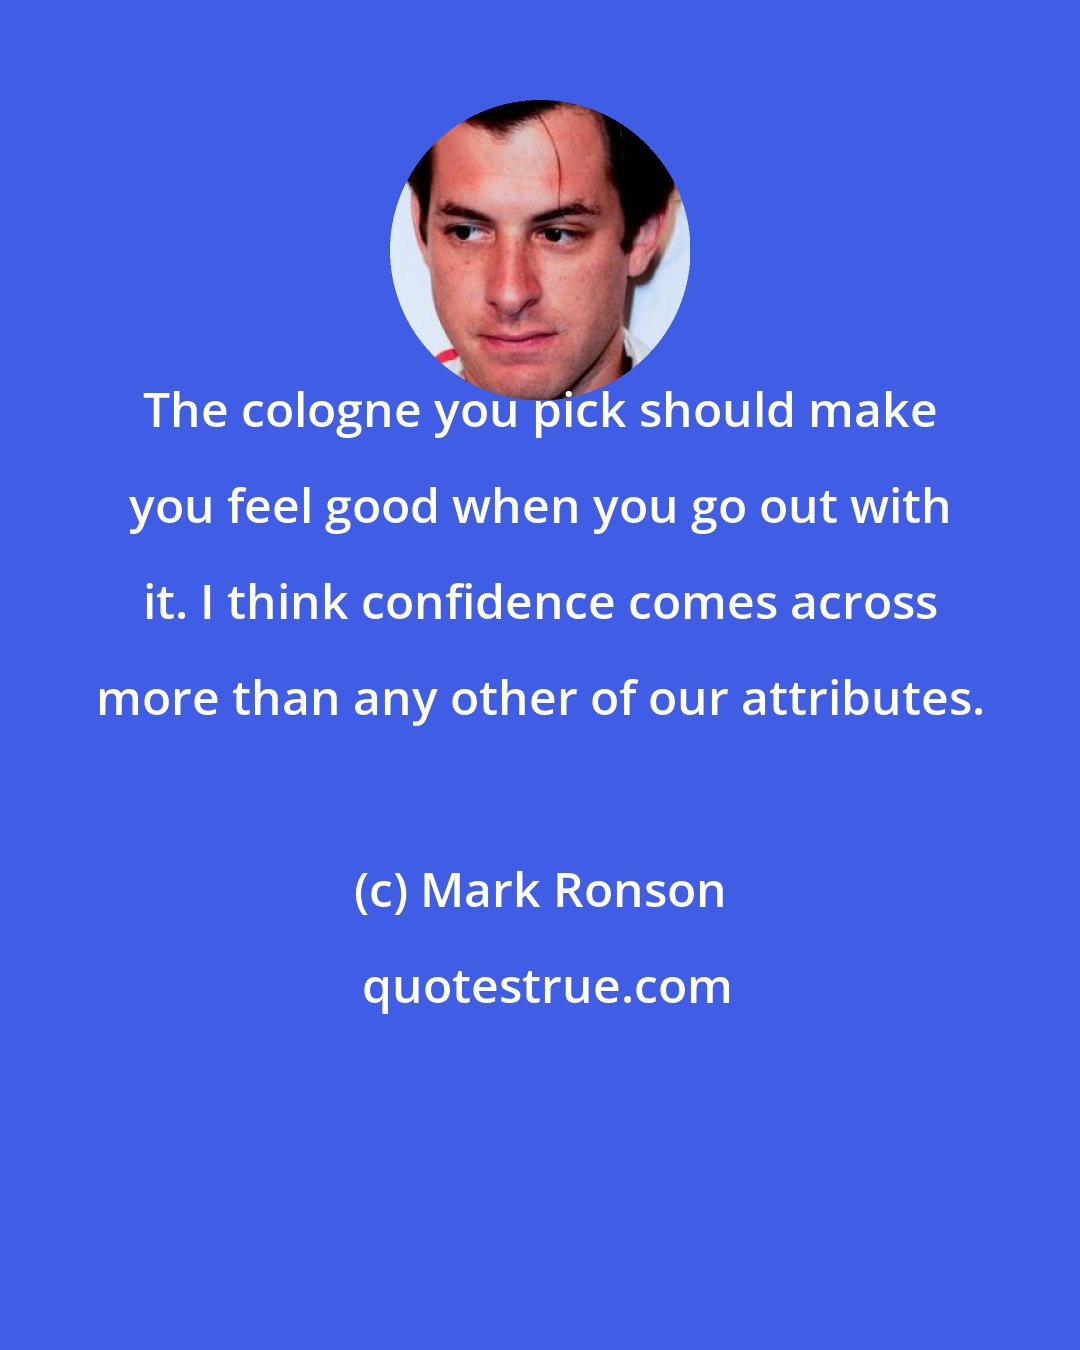 Mark Ronson: The cologne you pick should make you feel good when you go out with it. I think confidence comes across more than any other of our attributes.